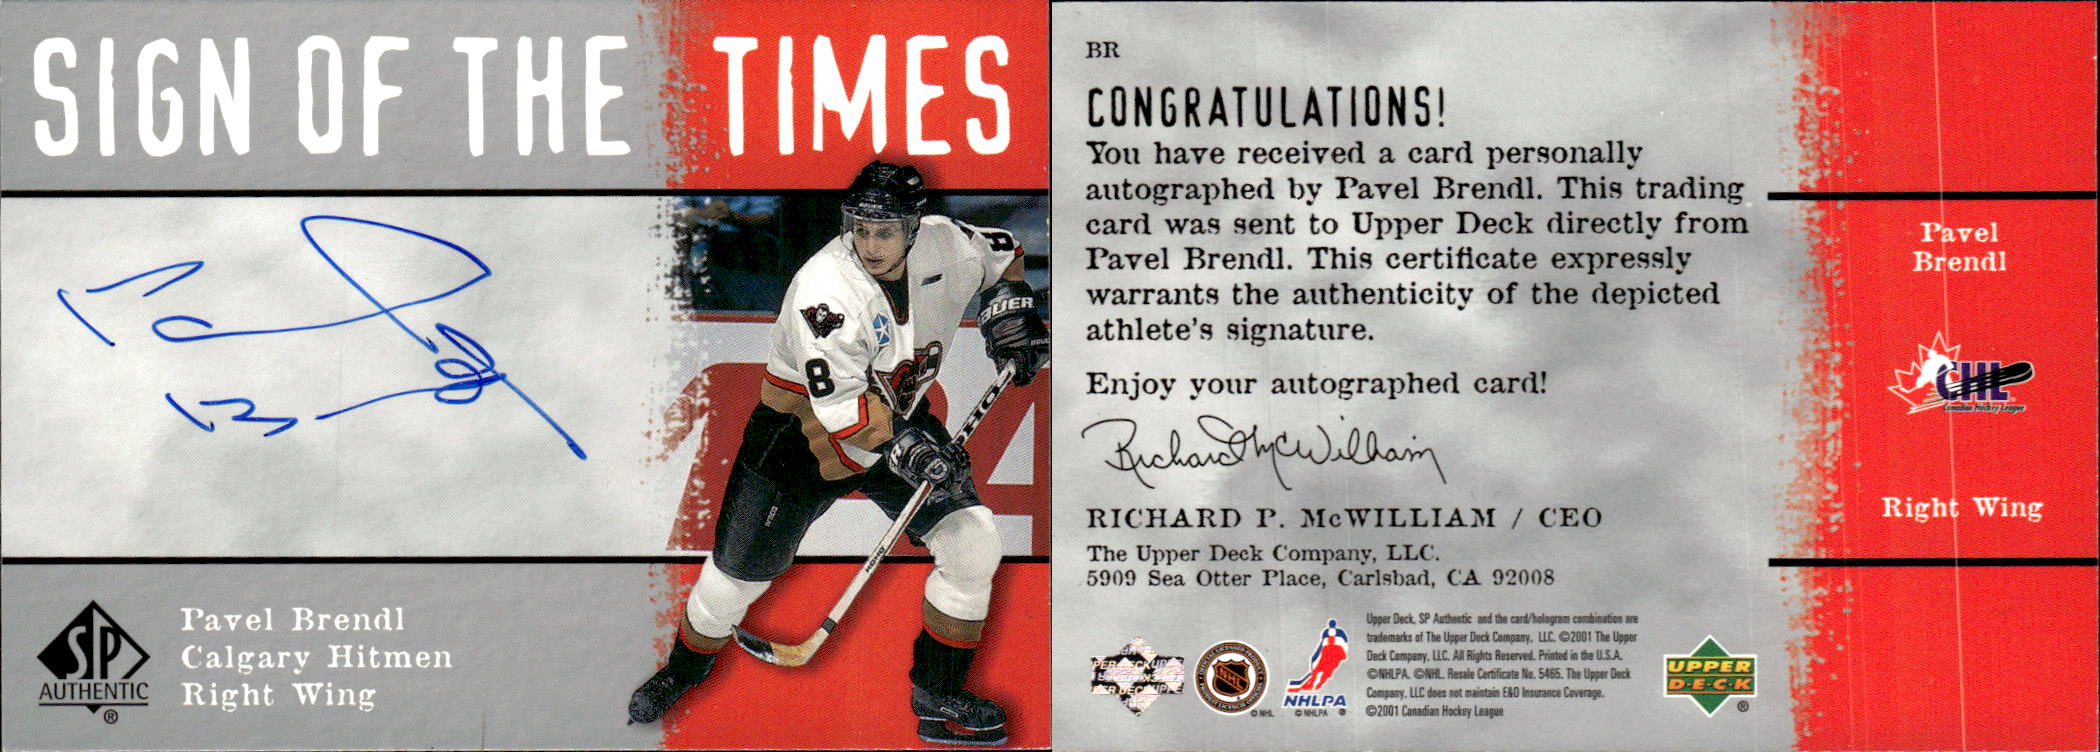 2000-01 SP Authentic Sign of the Times #BR Pavel Brendl